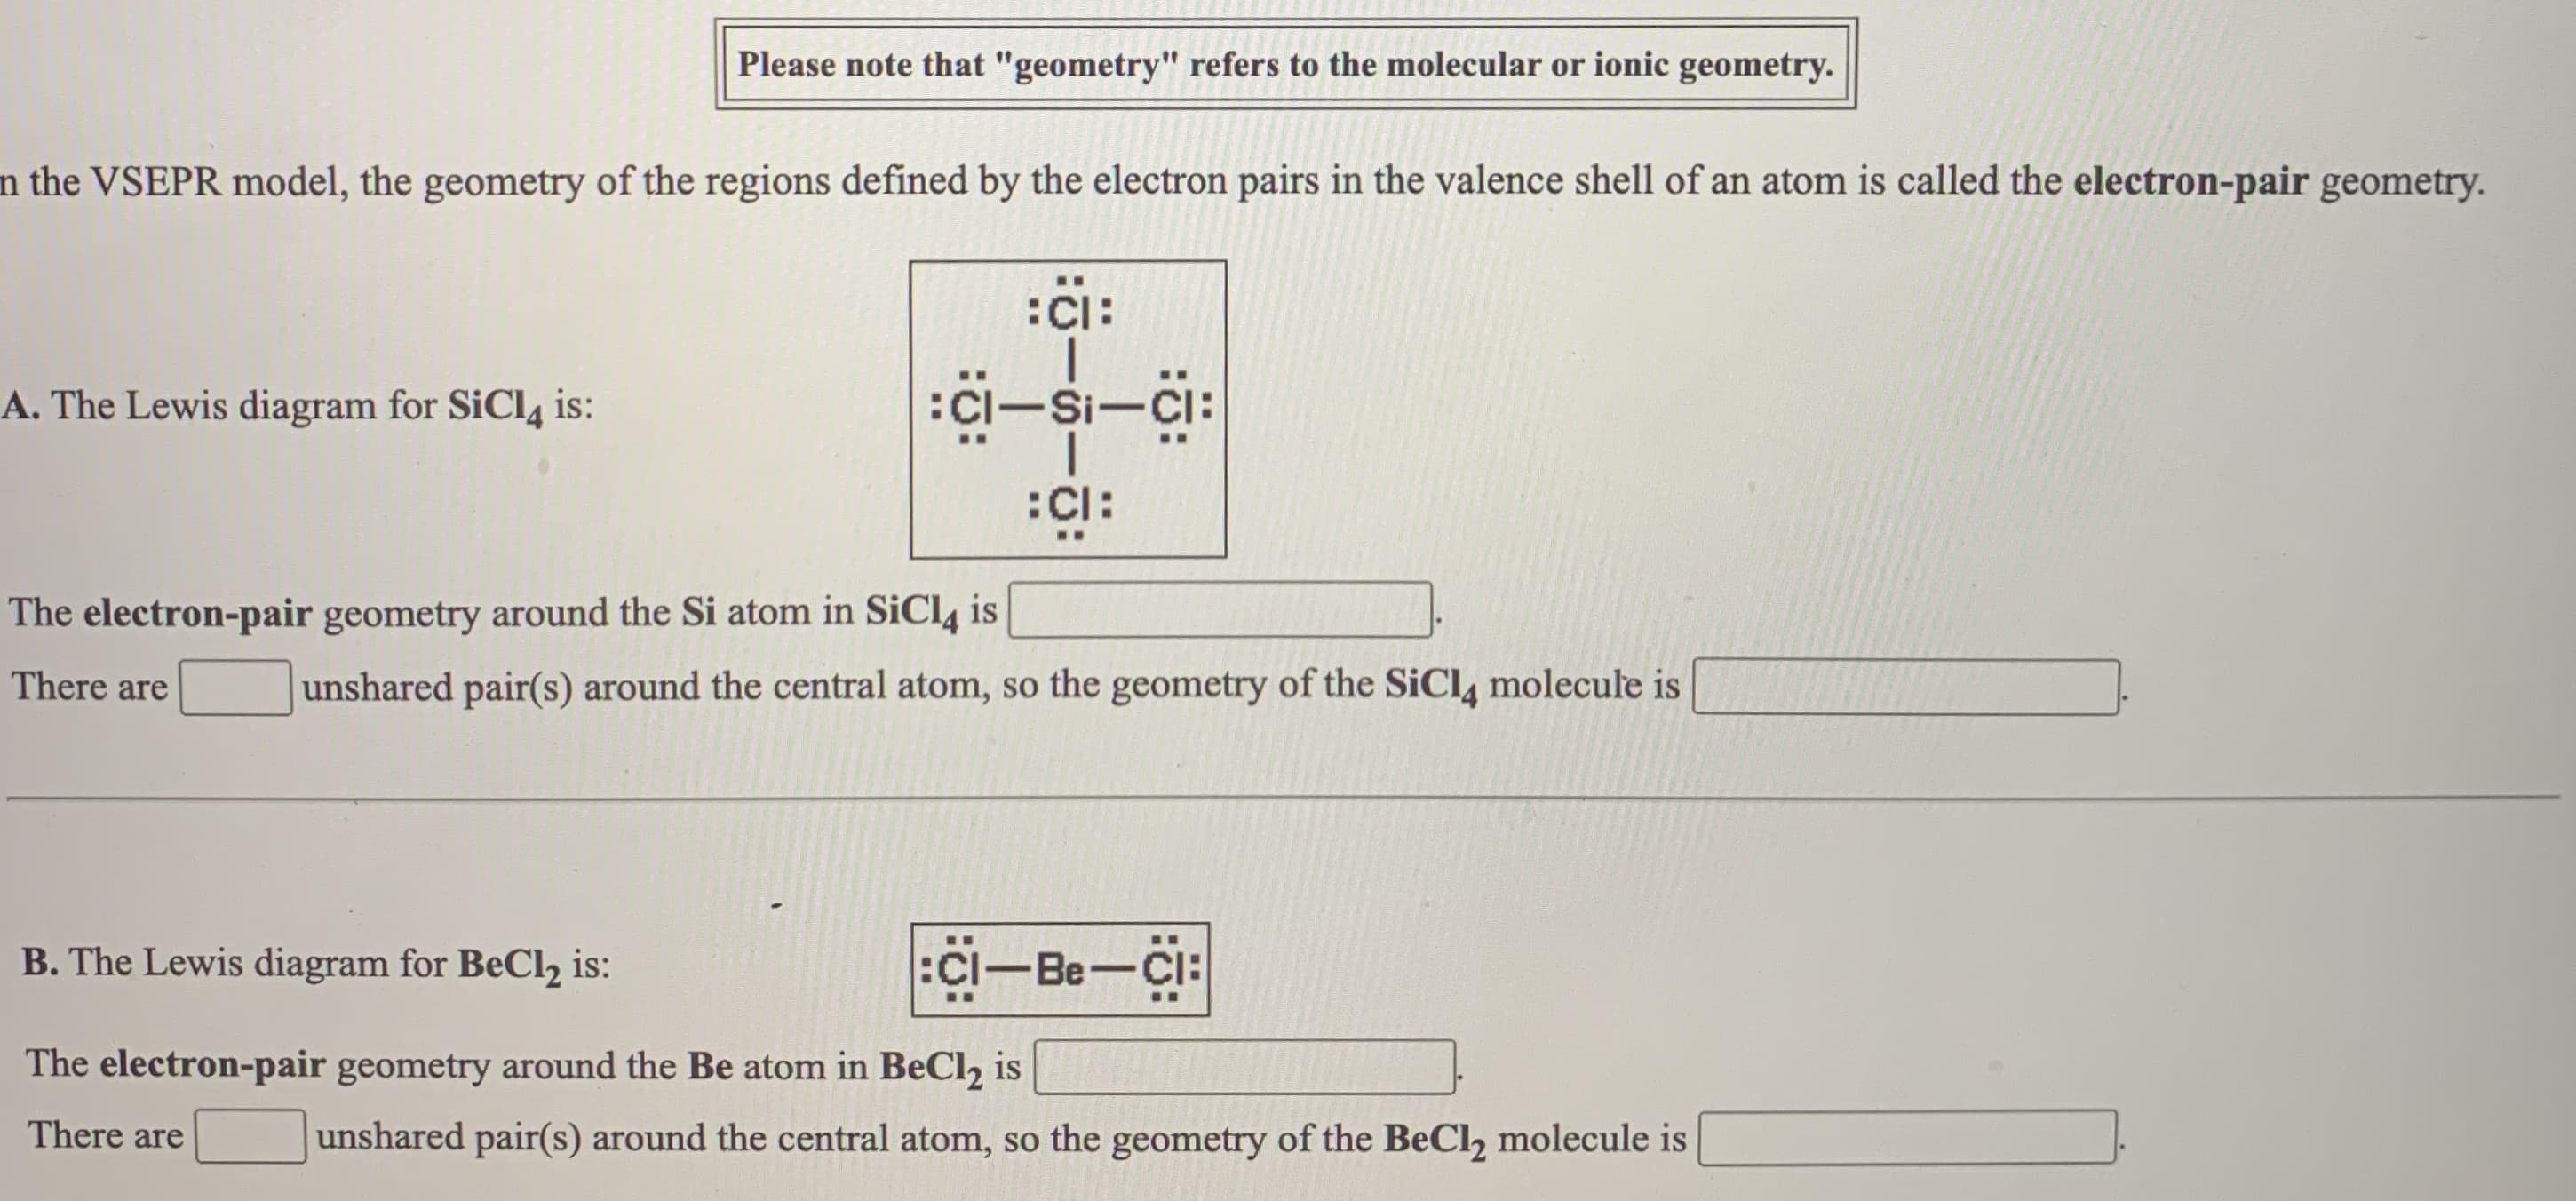 the VSEPR model, the geometry of the regions defined by the electron pairs in the valence shell of an atom is called the electron-pair geometry.
:Ci:
A. The Lewis diagram for SiCl4 is:
:CI-Si-Ci:
:Cl:
The electron-pair geometry around the Si atom in SiCl, is
There are
unshared pair(s) around the central atom, so the geometry of the SiCl4 molecule is
B. The Lewis diagram for BeCl2 is:
:Ci-Be-Ci:
..
The electron-pair geometry around the Be atom in BeCl, is
There are
unshared pair(s) around the central atom, so the geometry of the BeCl, molecule is
